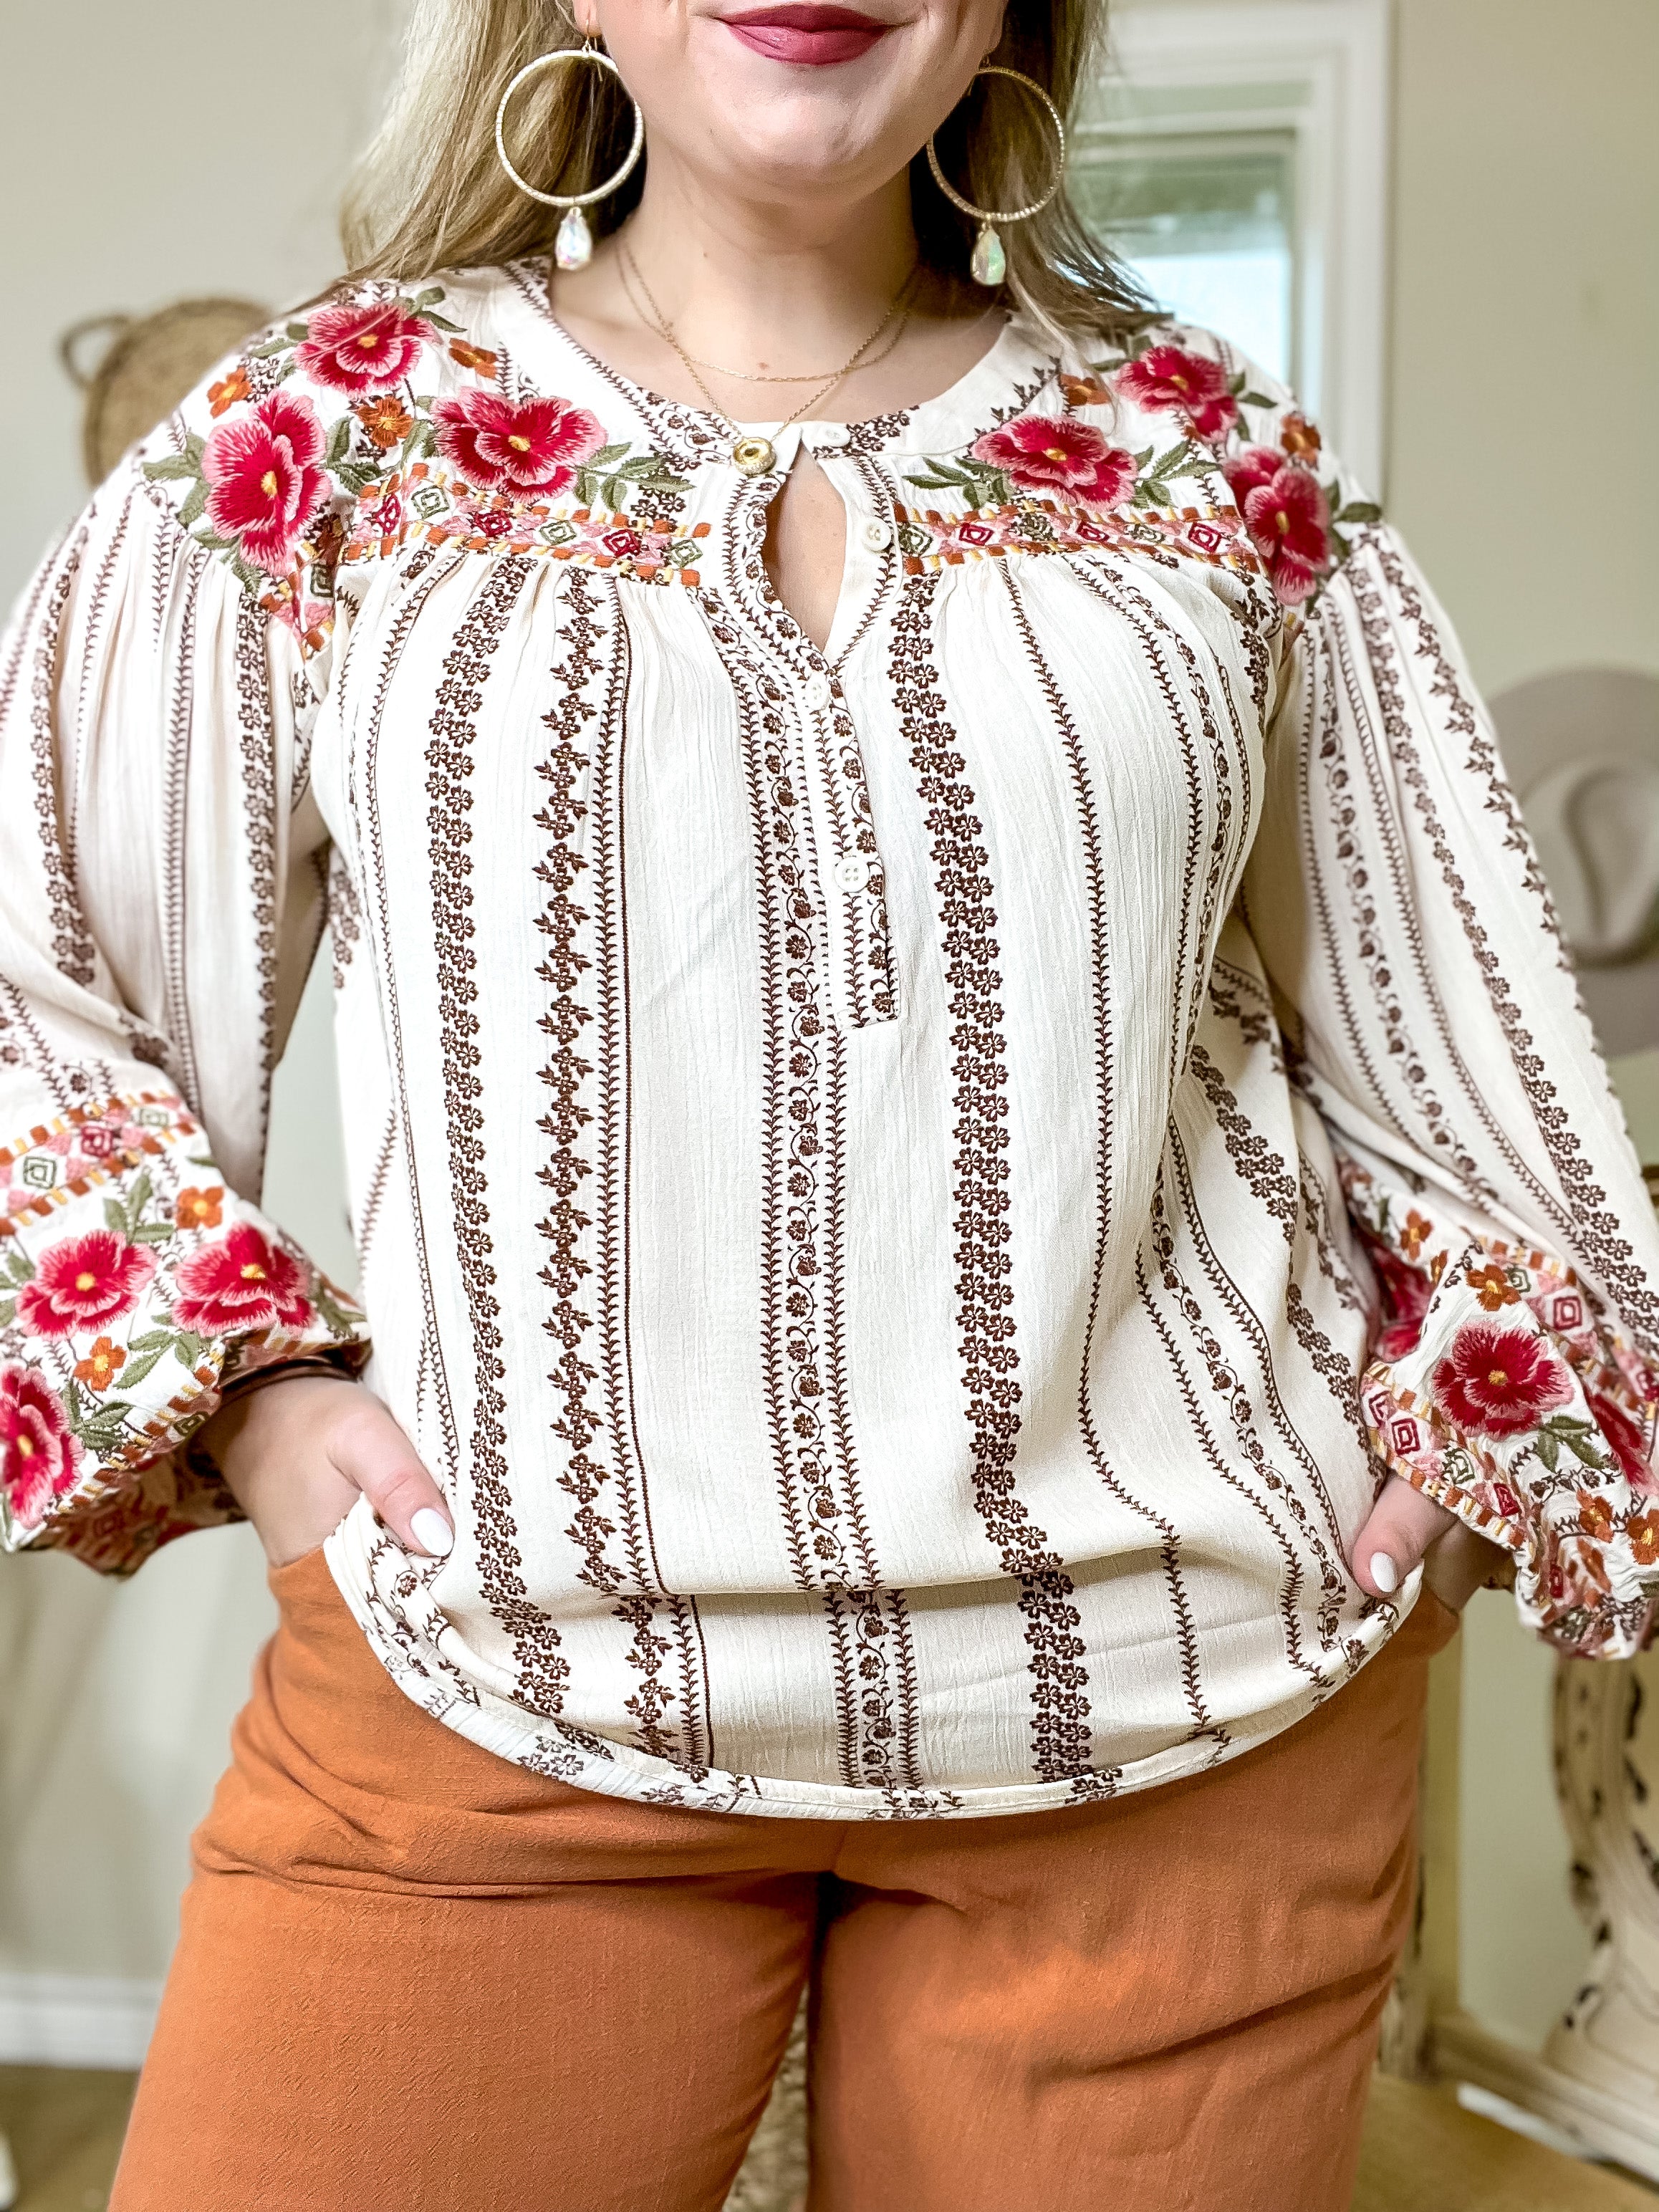 Savanna Jane | New Trails Long Sleeve Tribal Print Floral Embroidered Top in Cream - Giddy Up Glamour Boutique